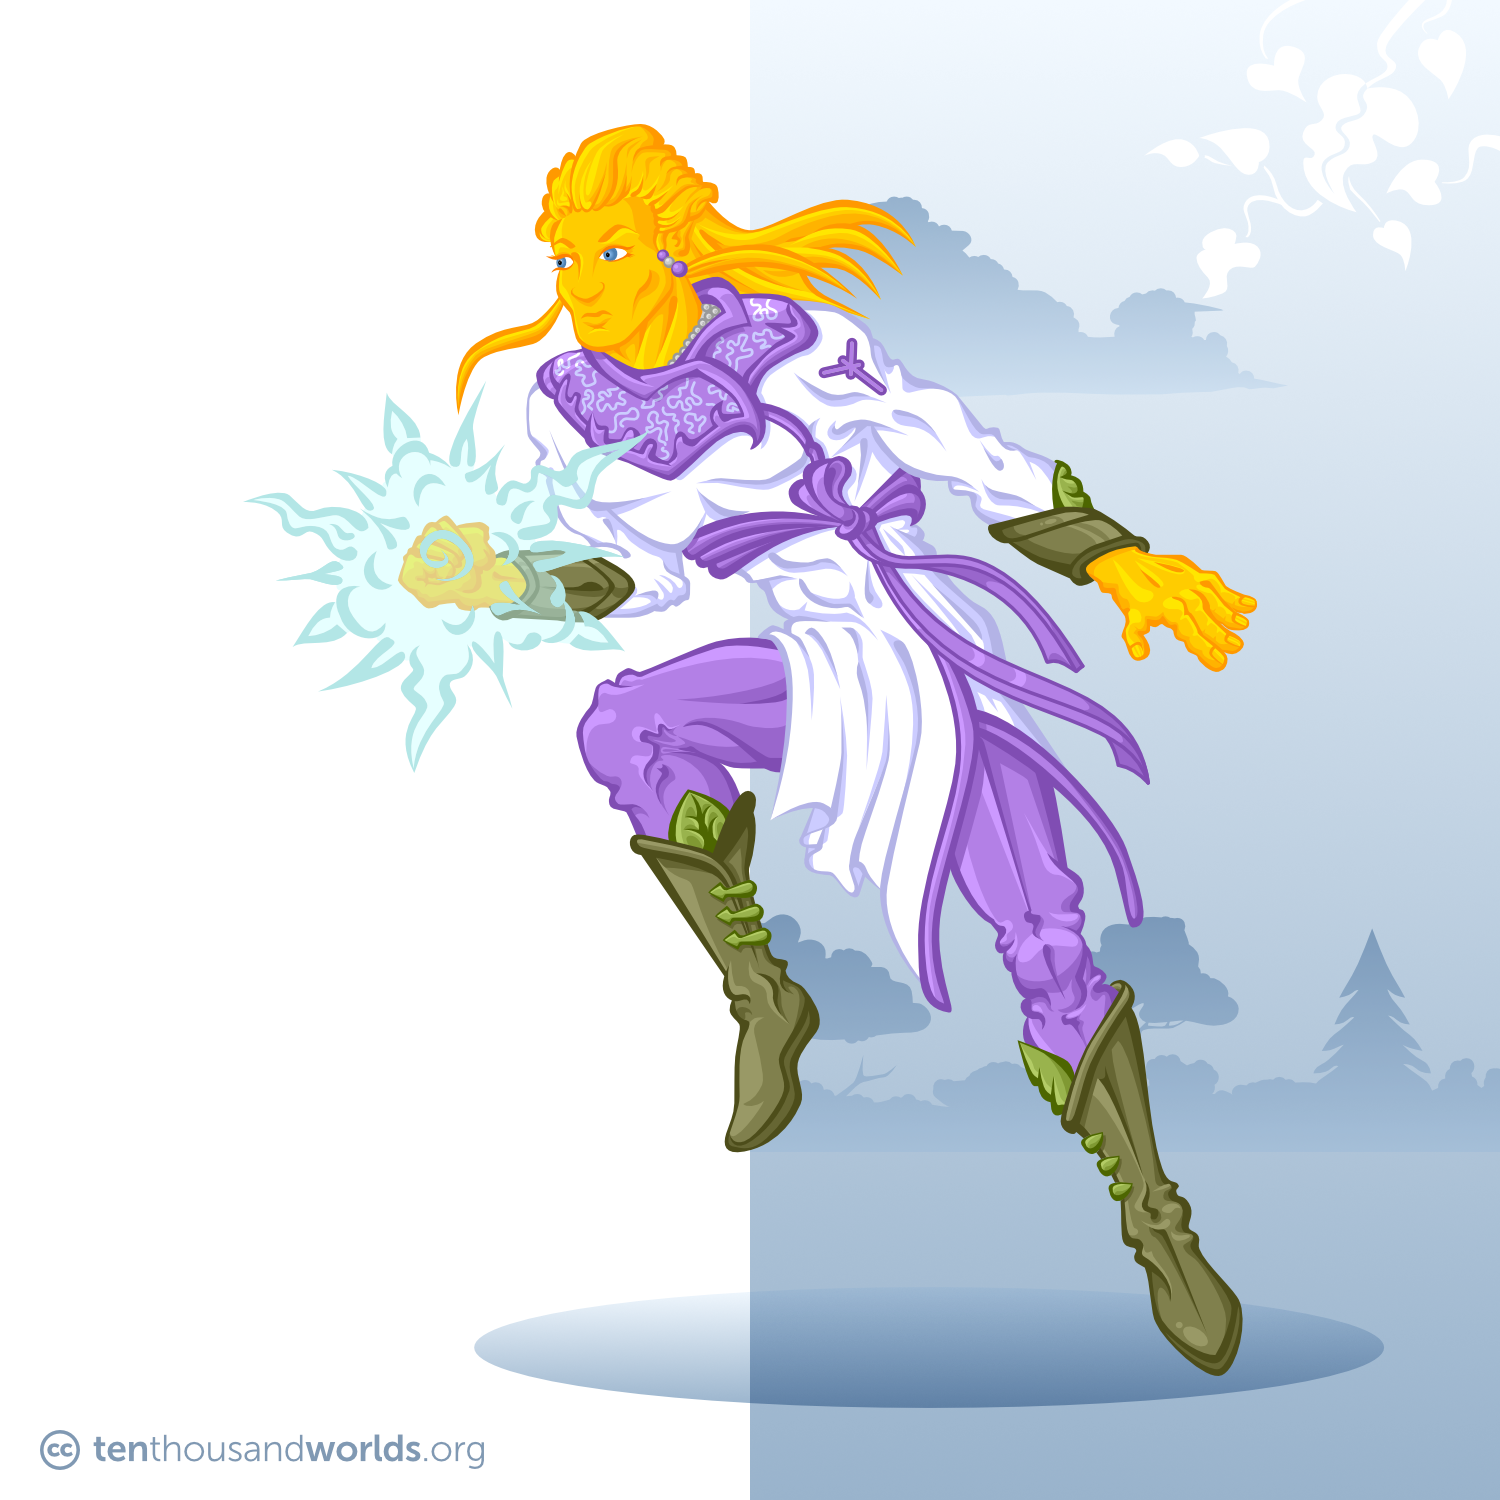 A human-like being with golden skin, long flowing hair, and pointed ears, wearing violet and white clothes decorated in plant motifs, leaping into action while holding a crackling ball of mystic power in one first.